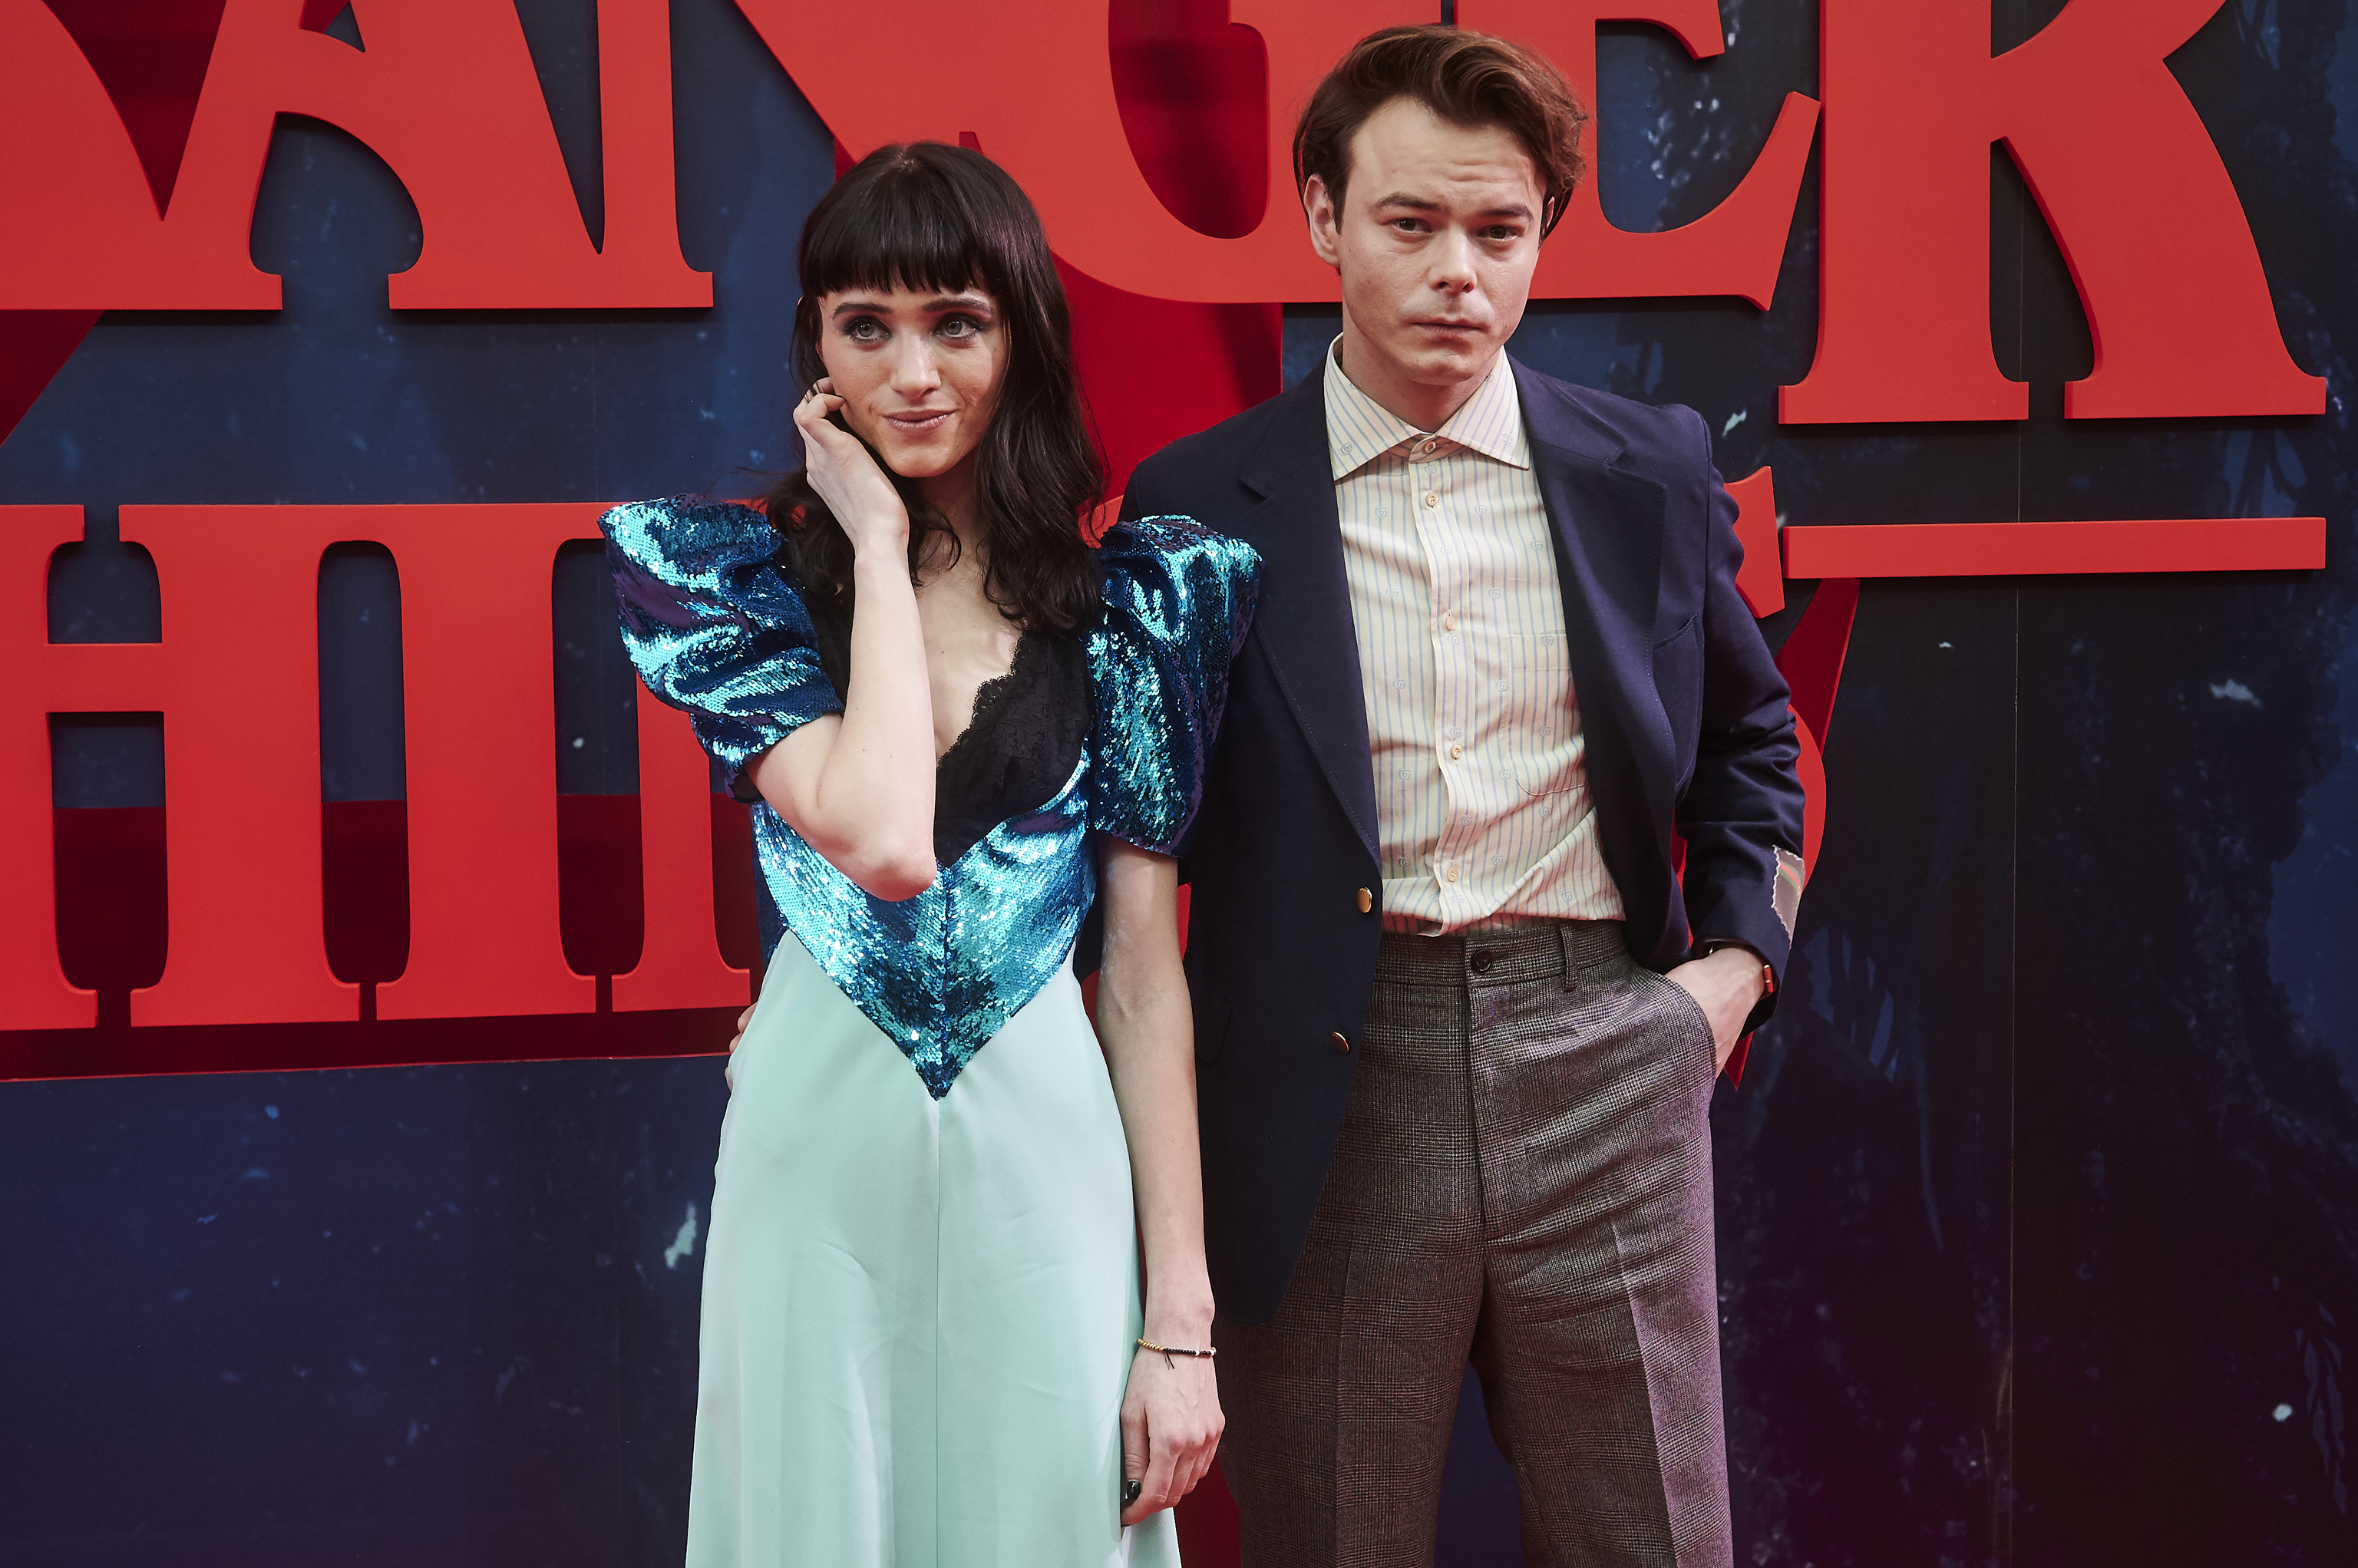 Natalia Dyer and Charlie Heaton, Stranger Things heroes